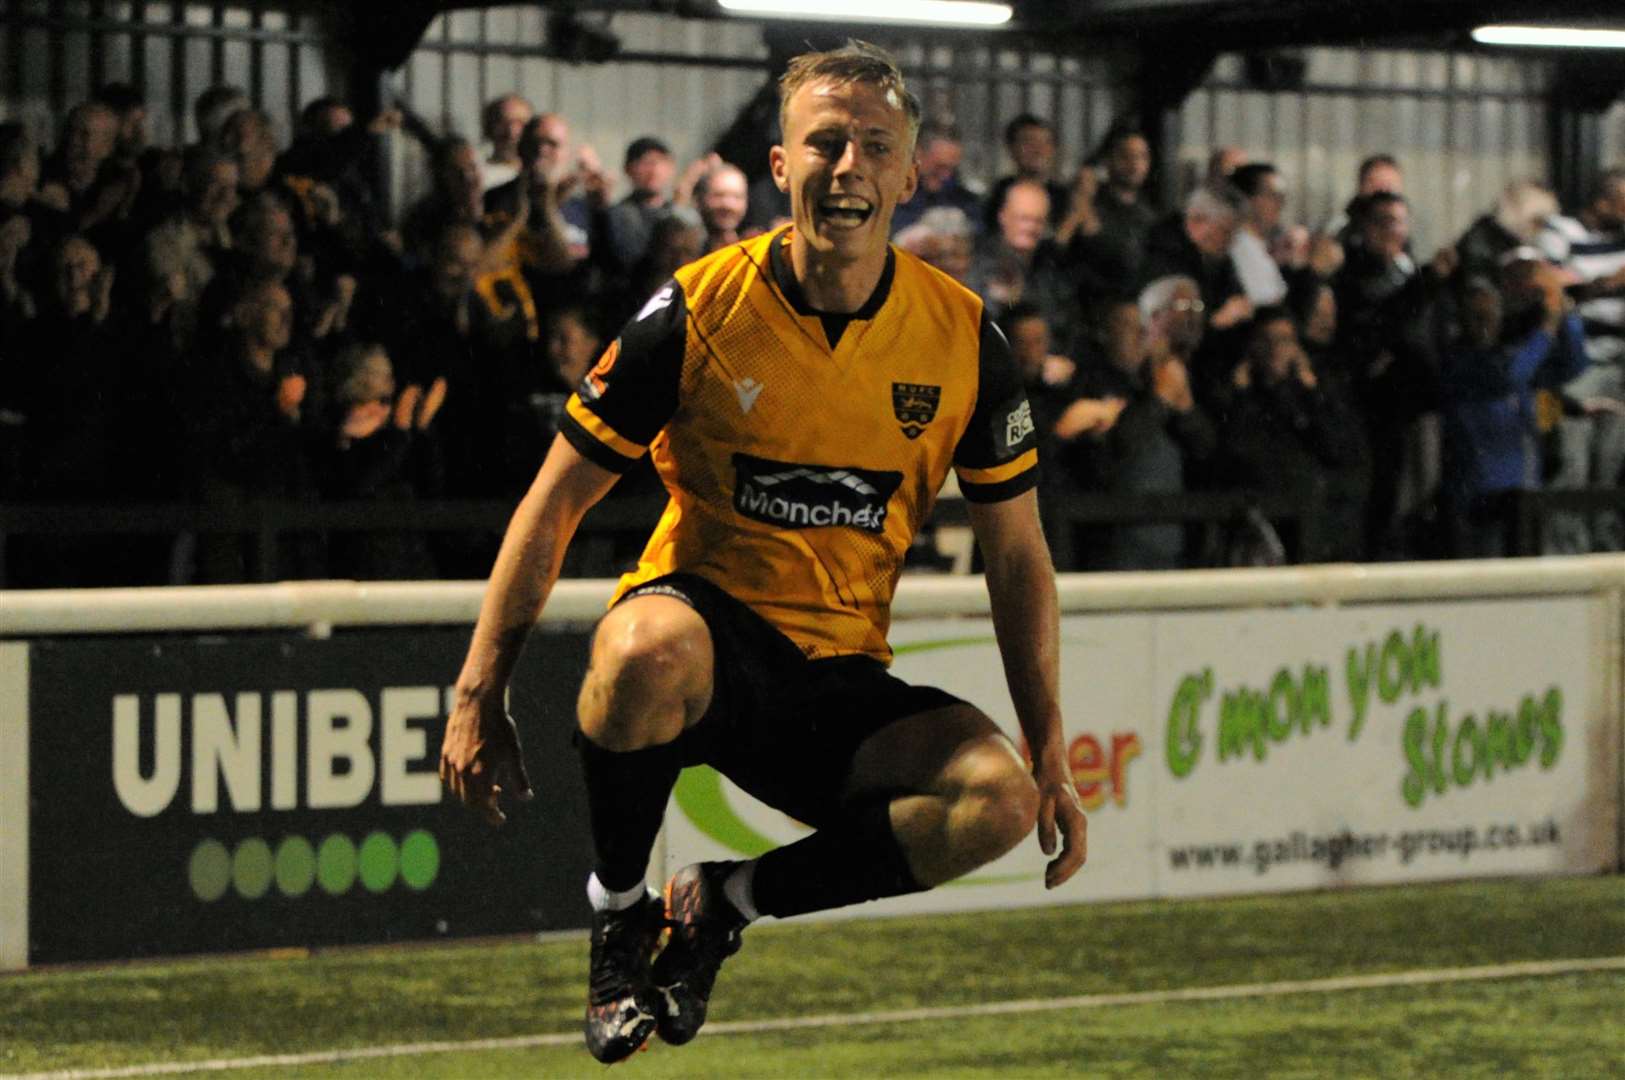 Sam Corne gives Maidstone the lead against Wealdstone on Tuesday night. Picture: Steve Terrell